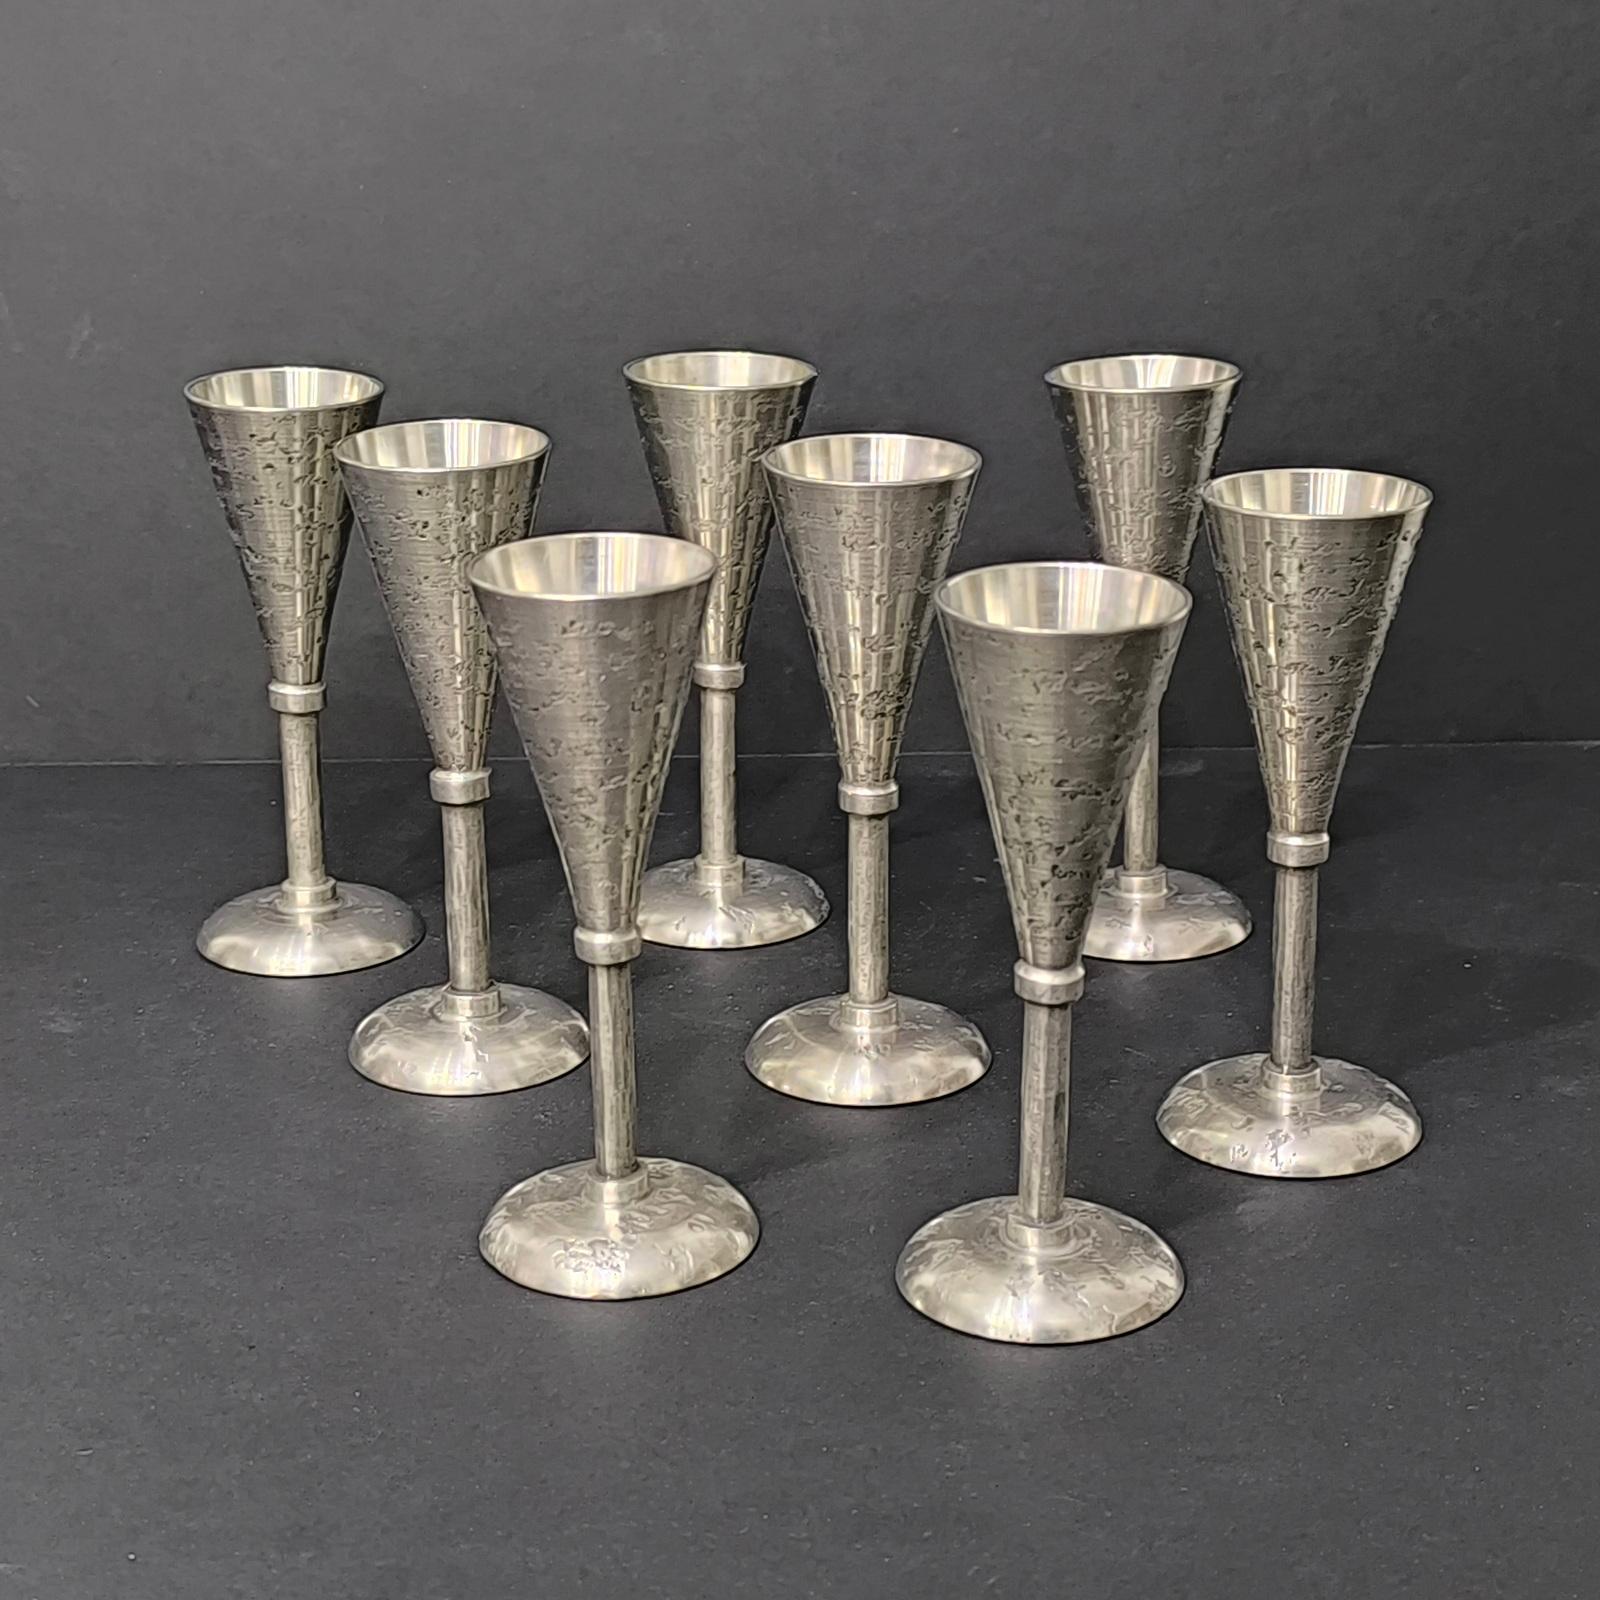 Vintage Pewter Cocktail Shaker Set of 32 Pieces, Viking Style, Norway 1970s For Sale 6